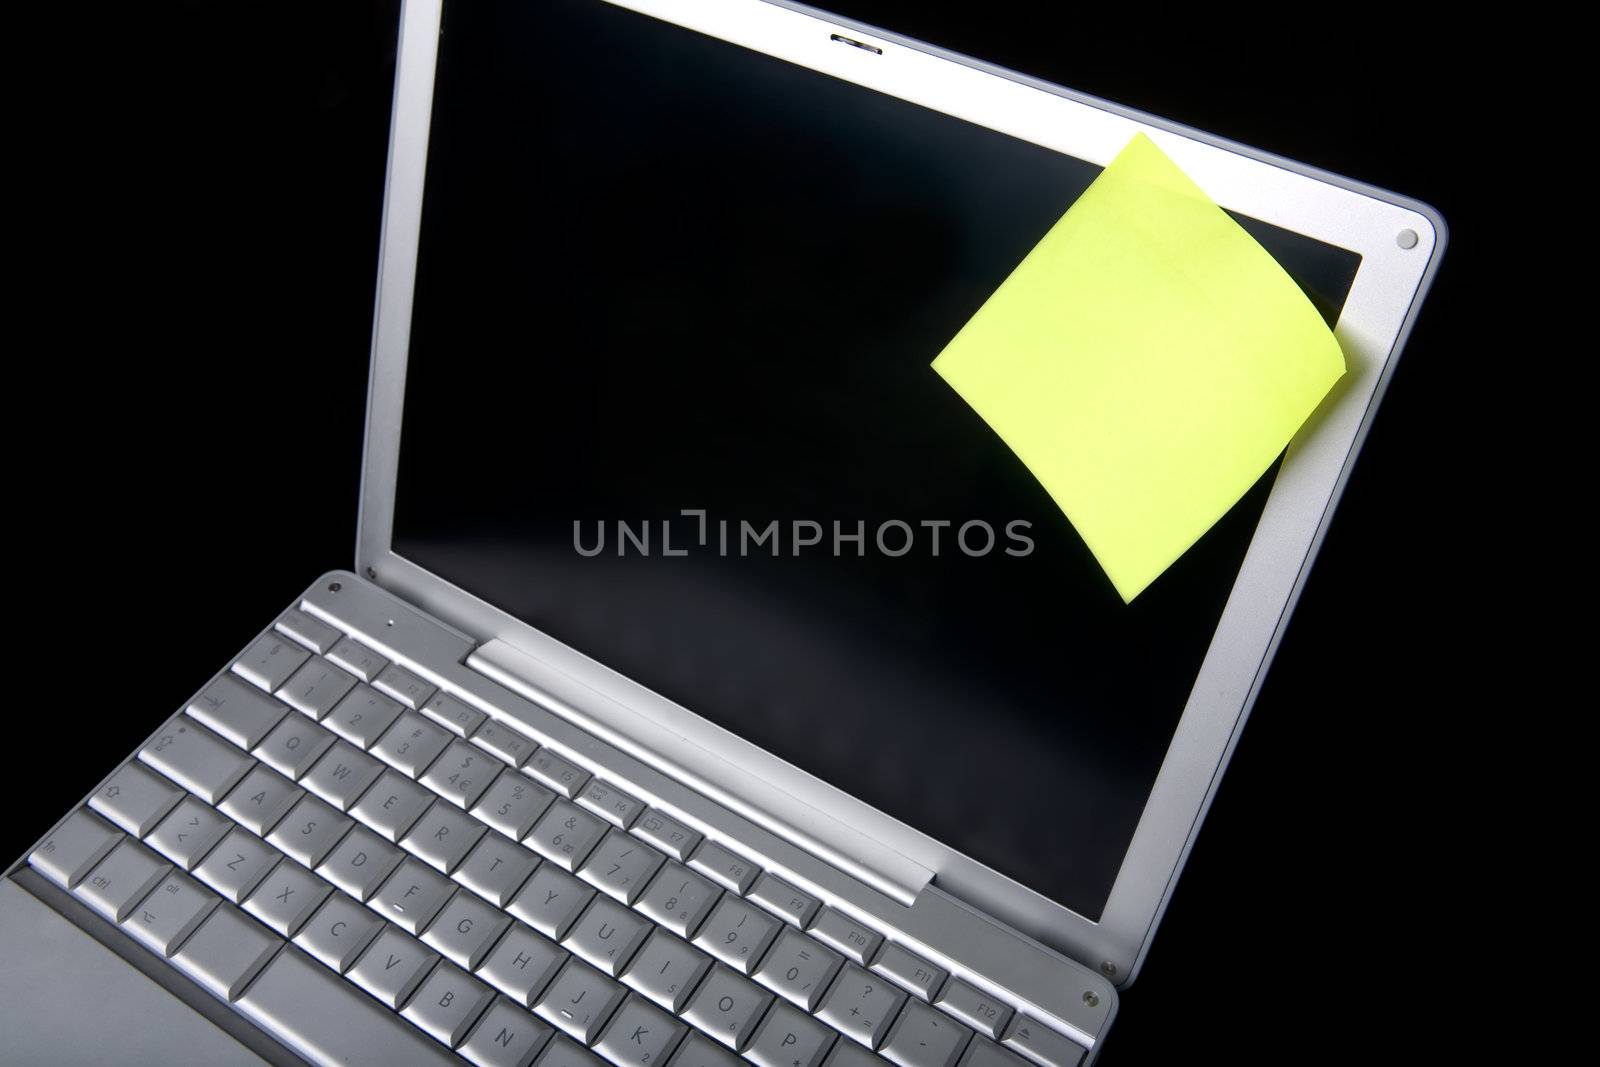 A sticky note on a laptop computer - remember this